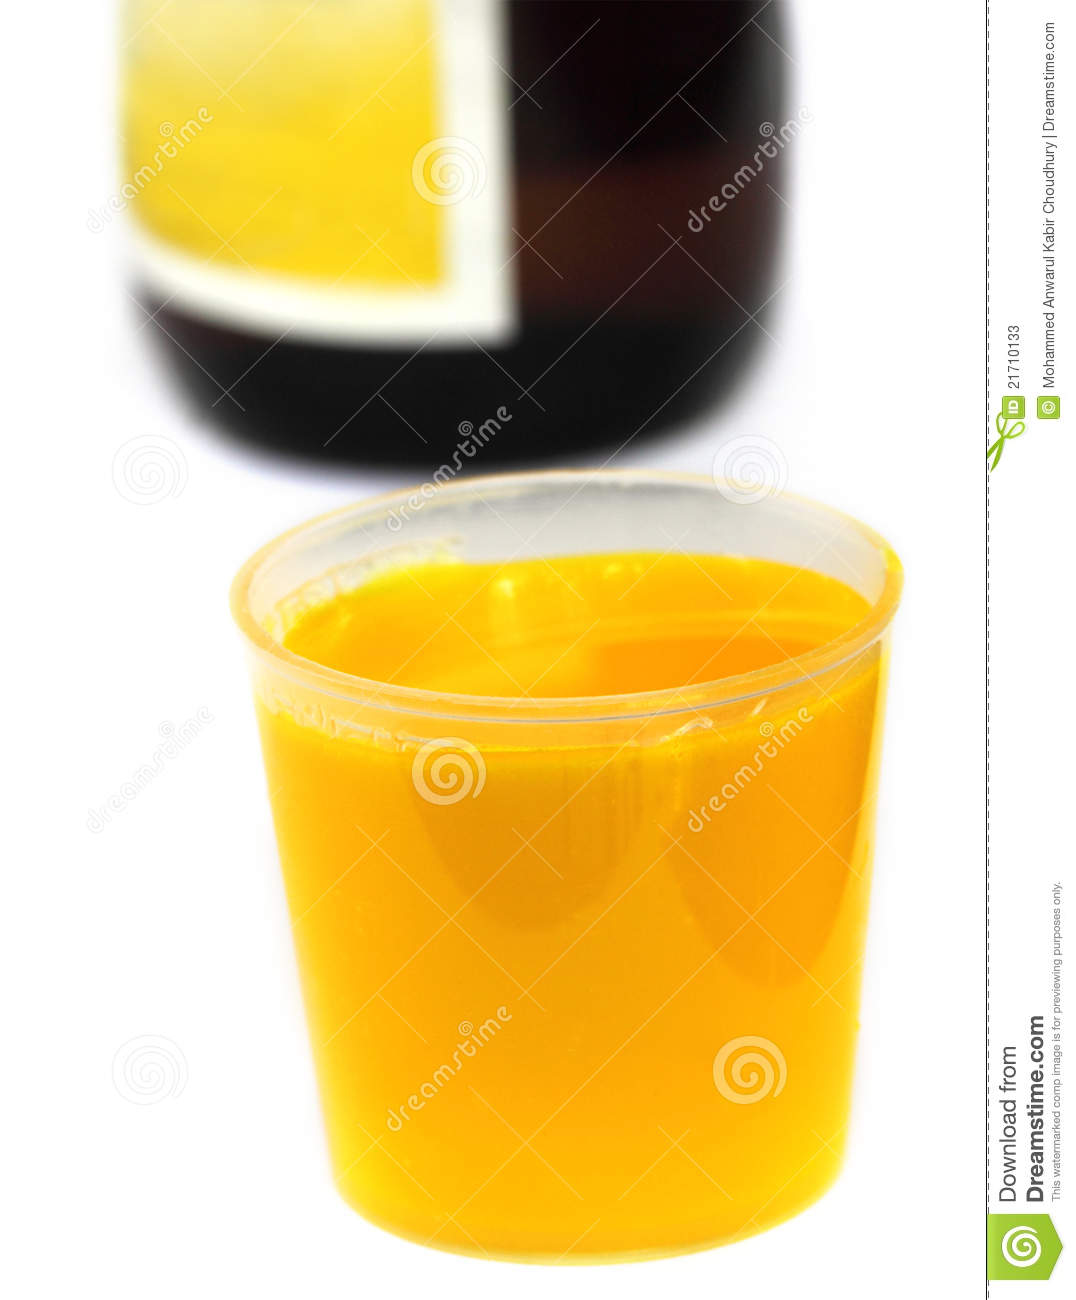 Vitamin B Complex Syrup With Bottle Stock Photos   Image  21710133